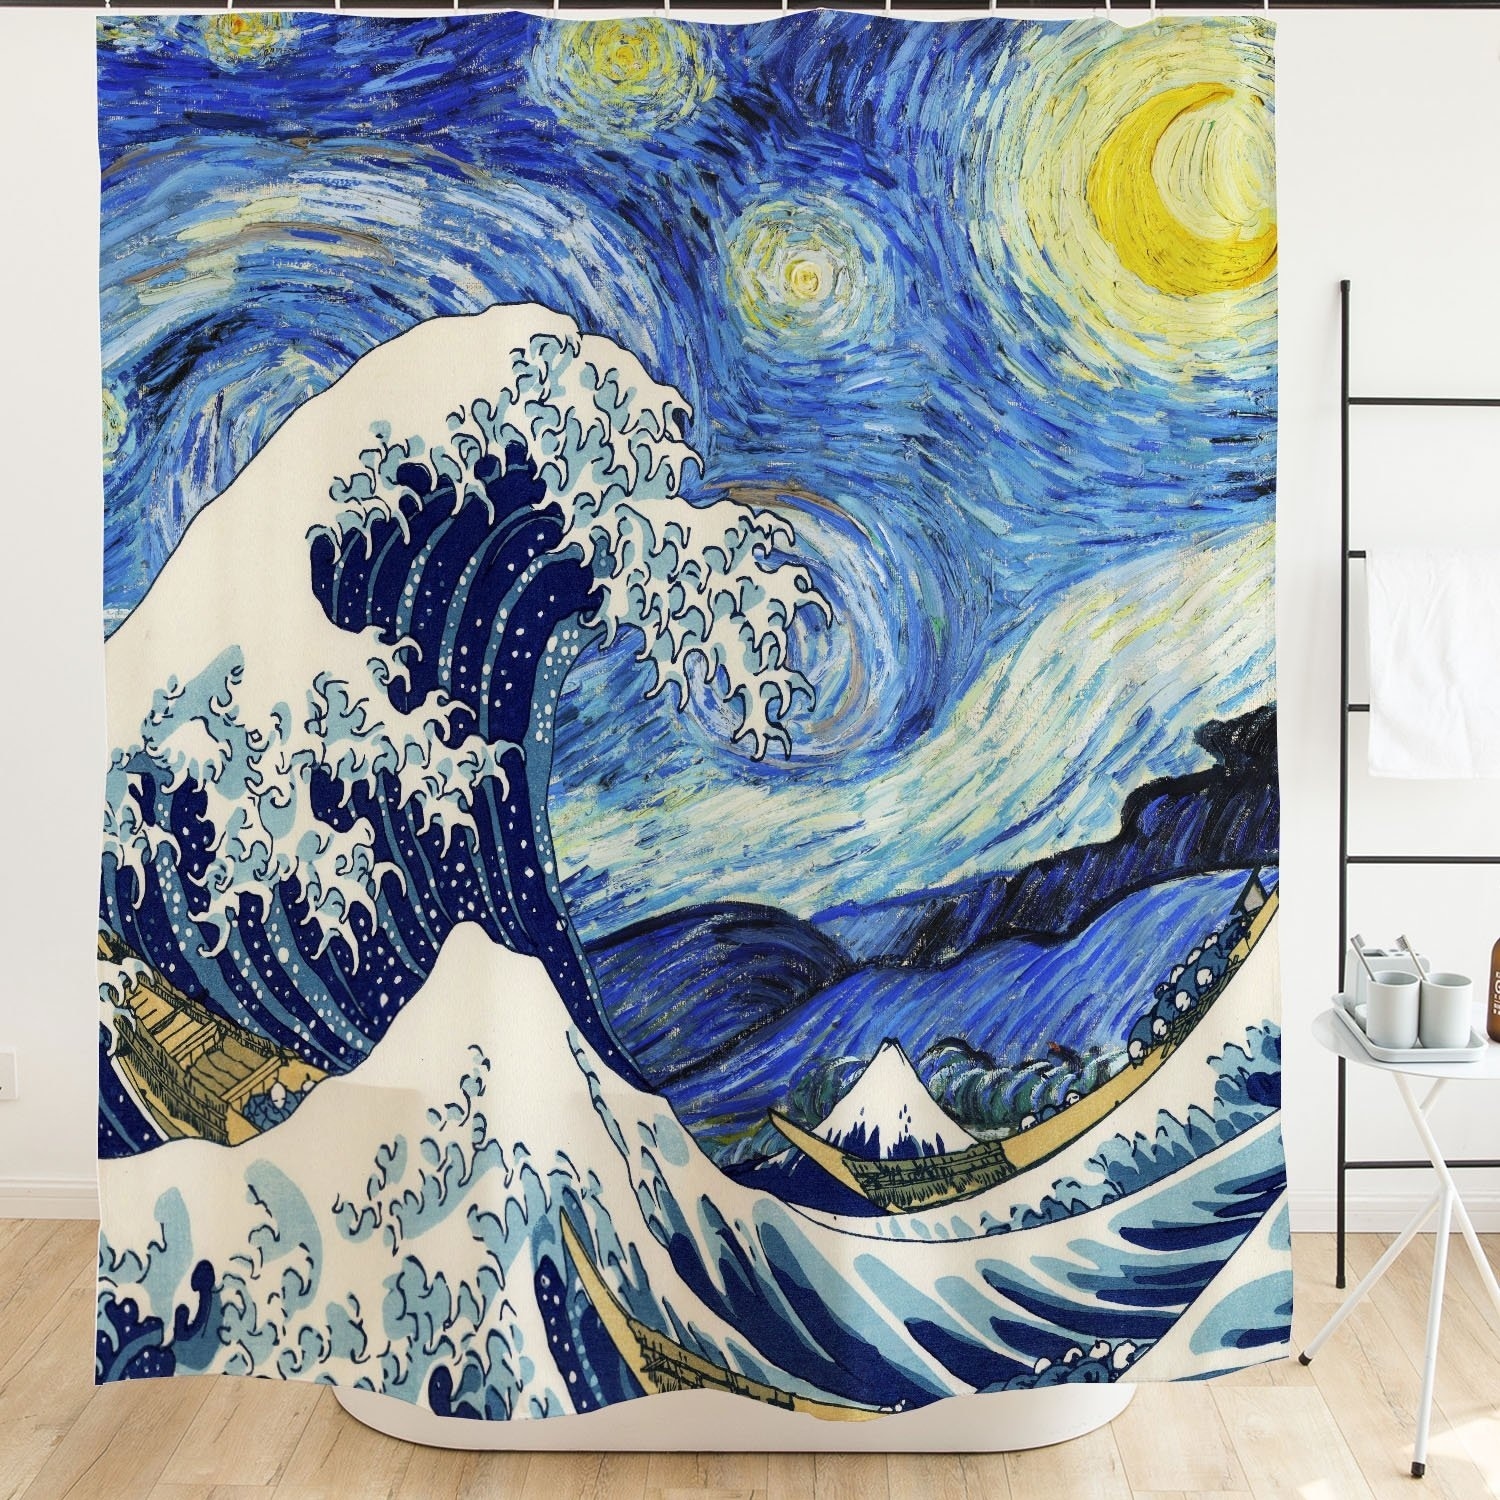 https://ak1.ostkcdn.com/images/products/is/images/direct/0a1c5a458642d84430c8654733ae0715a087bc36/Starry-Night-Japanese-Sea-Wave-Painting-Artistic-Blue-Shower-Curtain.jpg